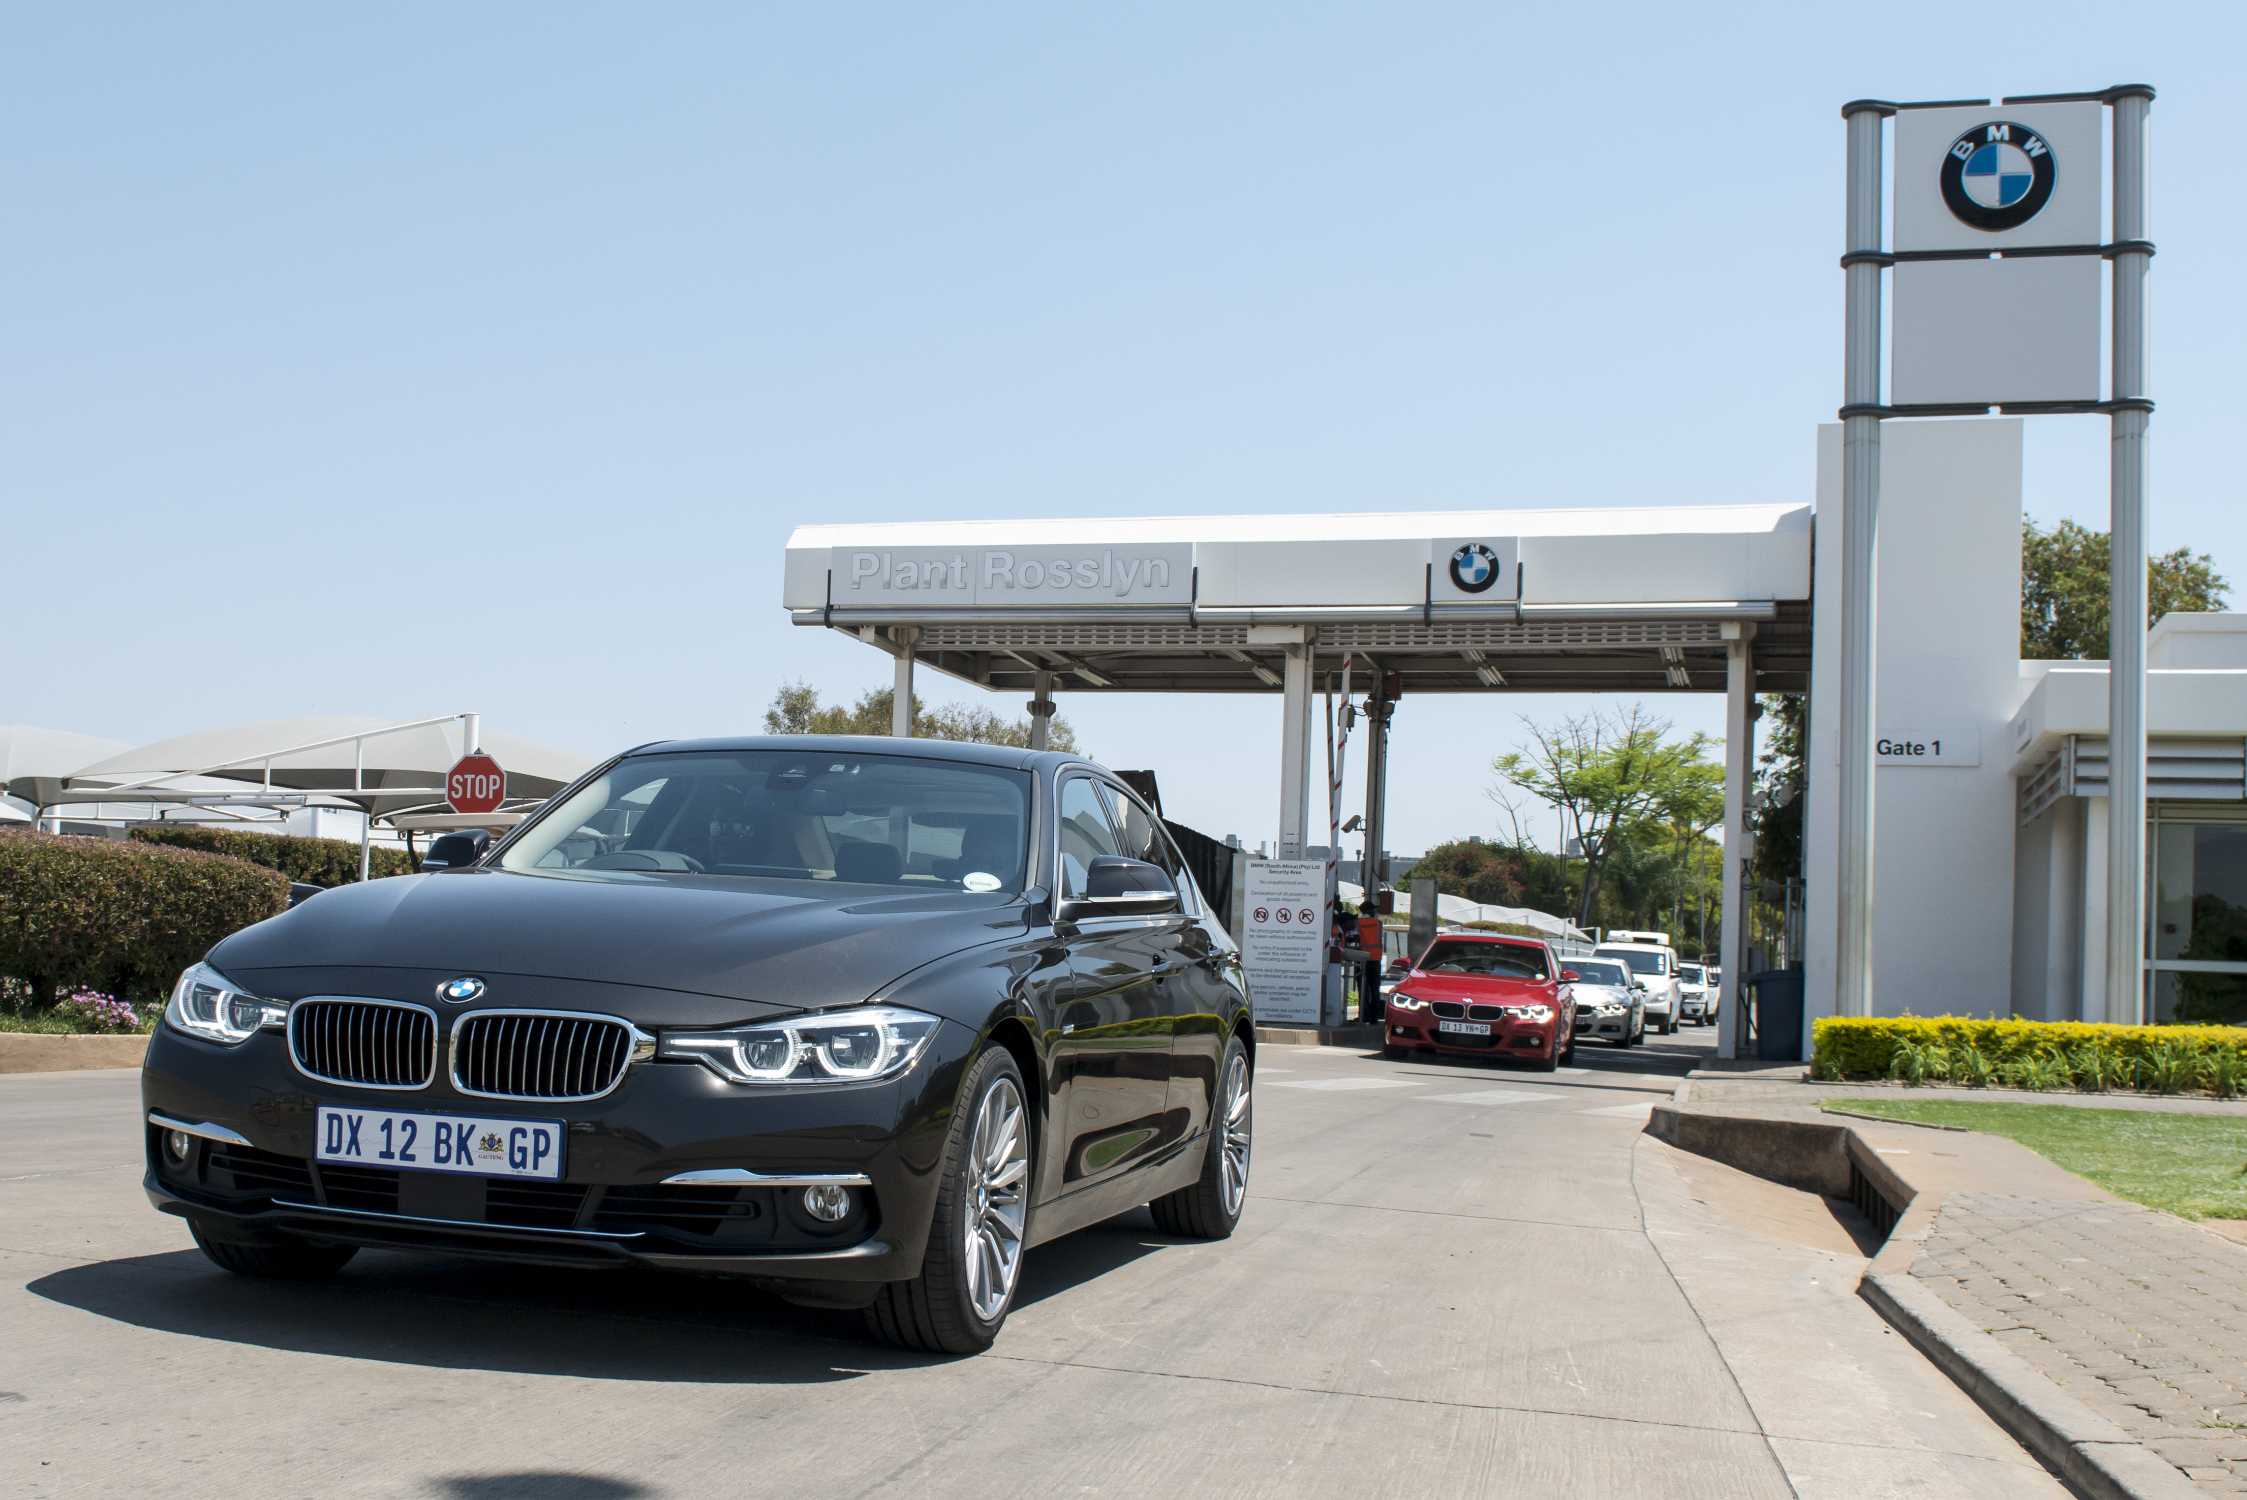 BMW South Africa’s Rosslyn plant receives first renewable energy from